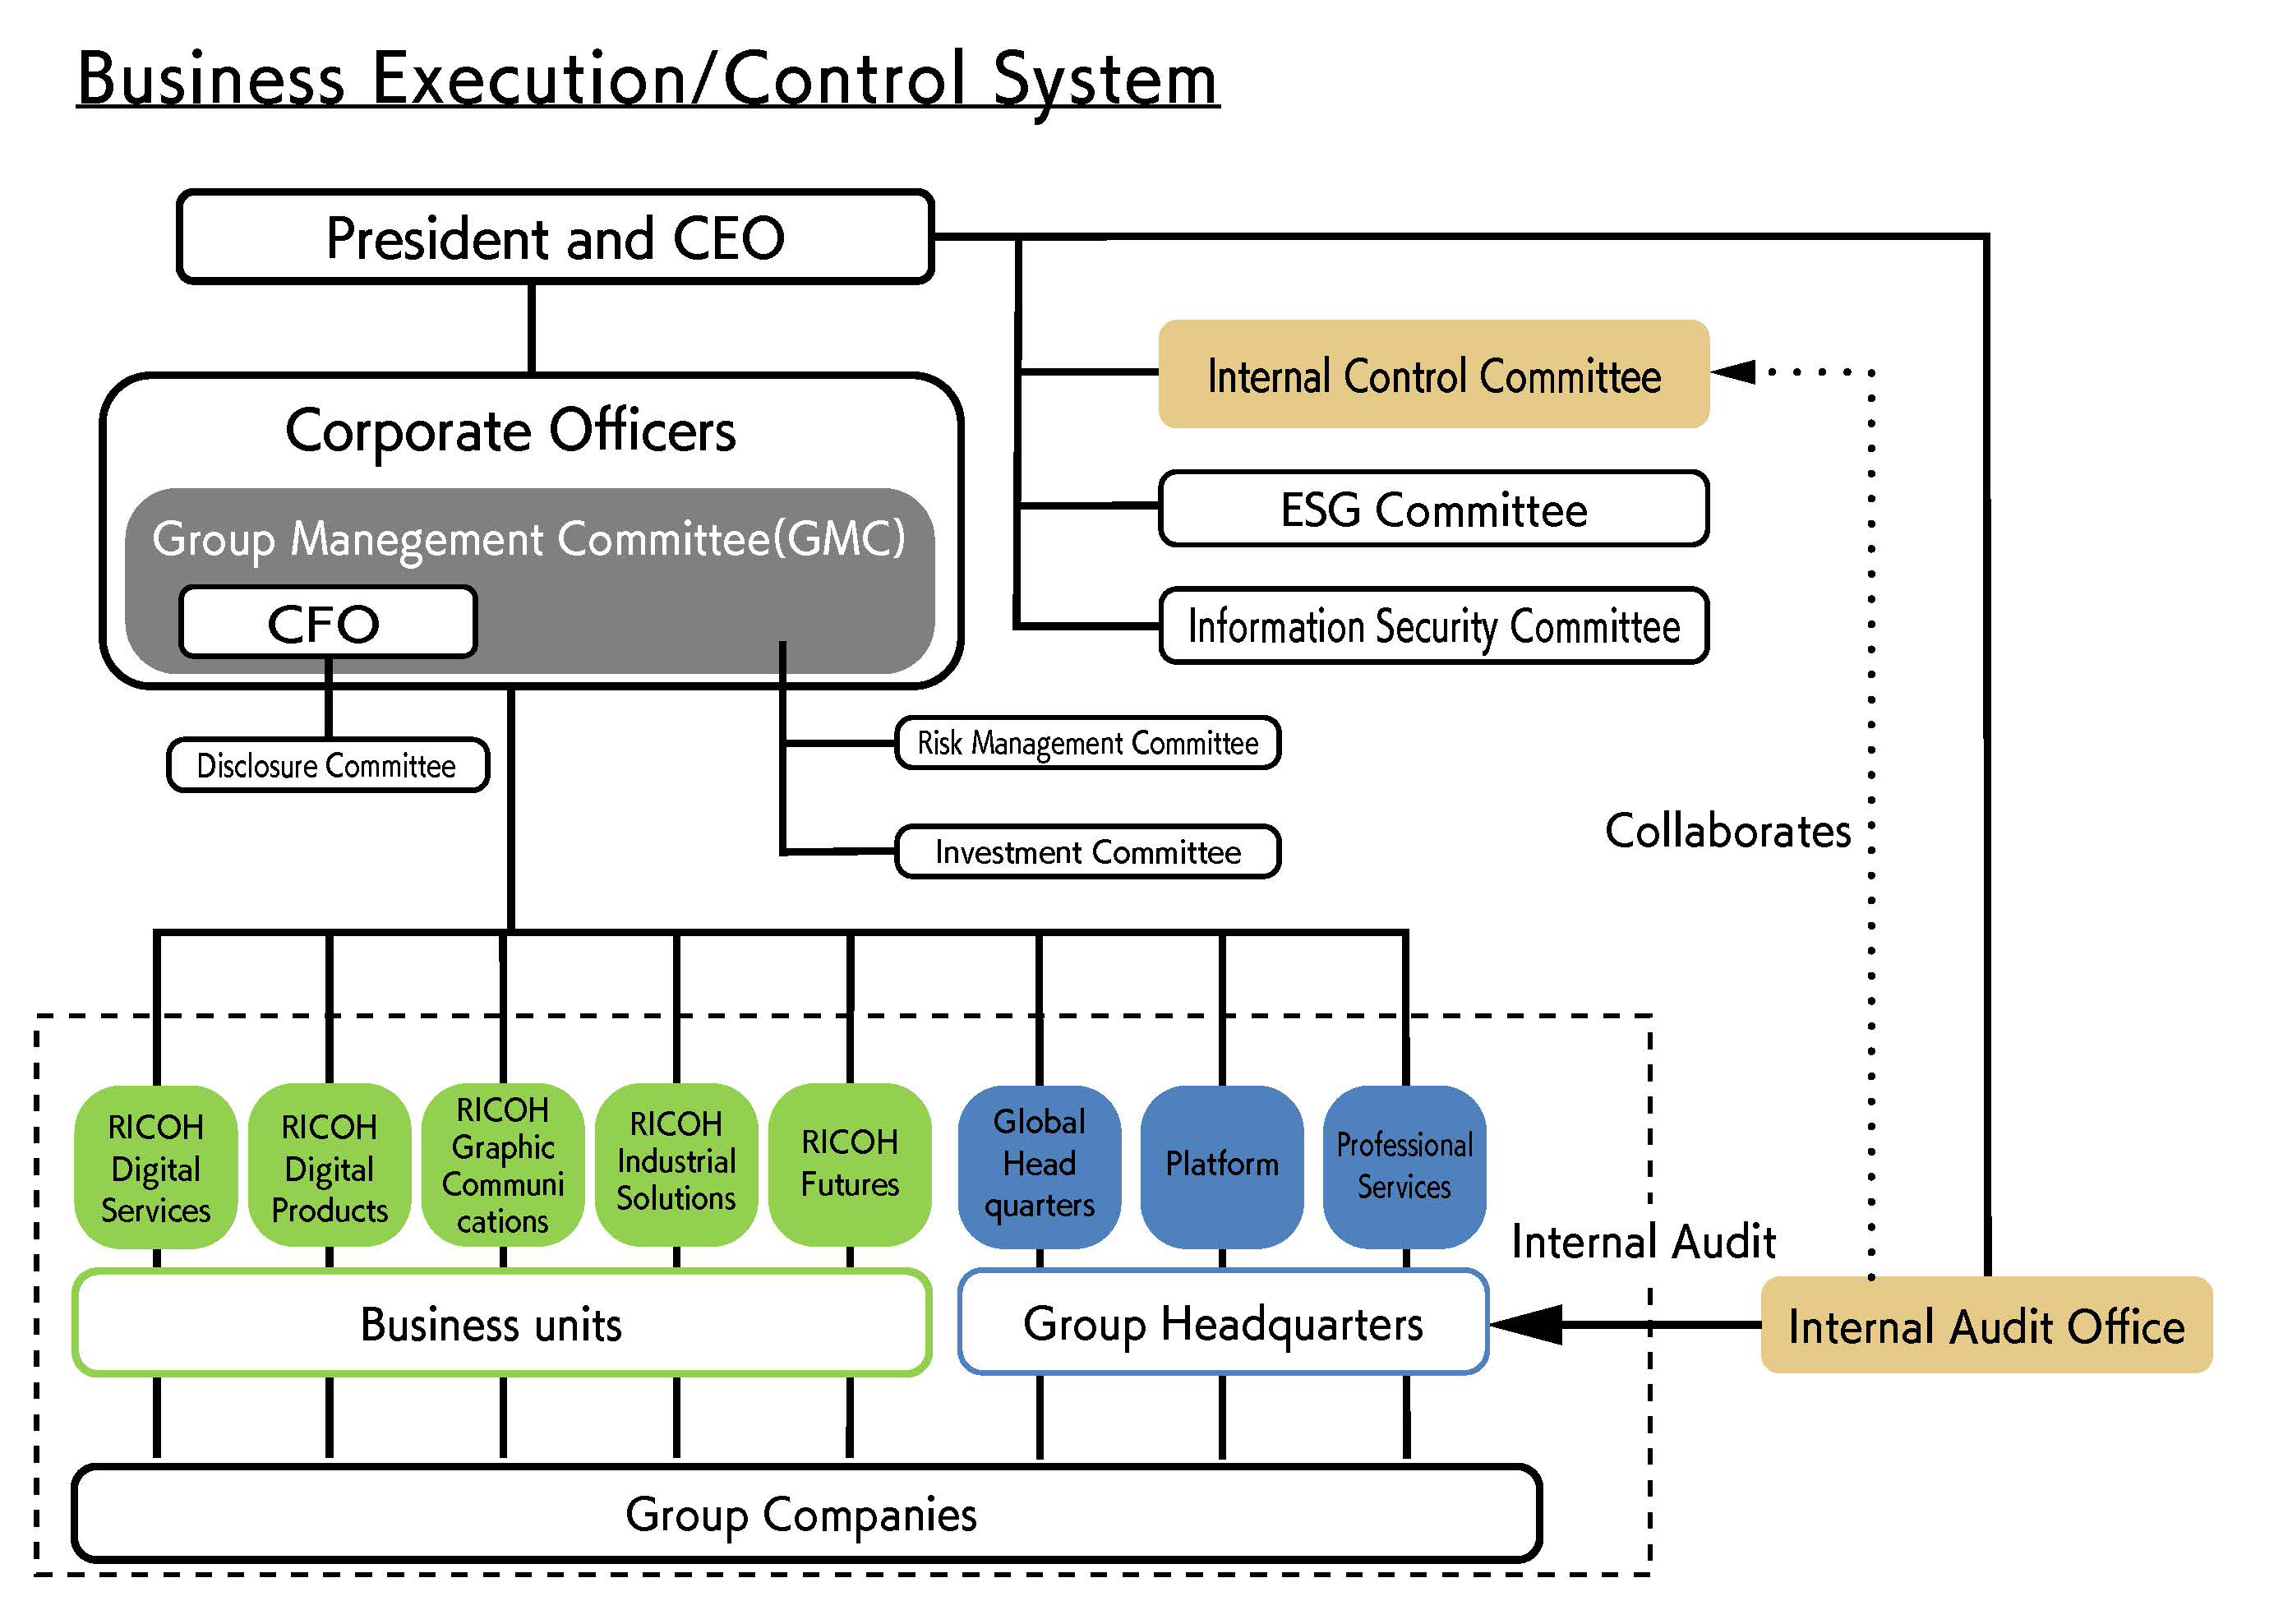 image:internal_control_structure